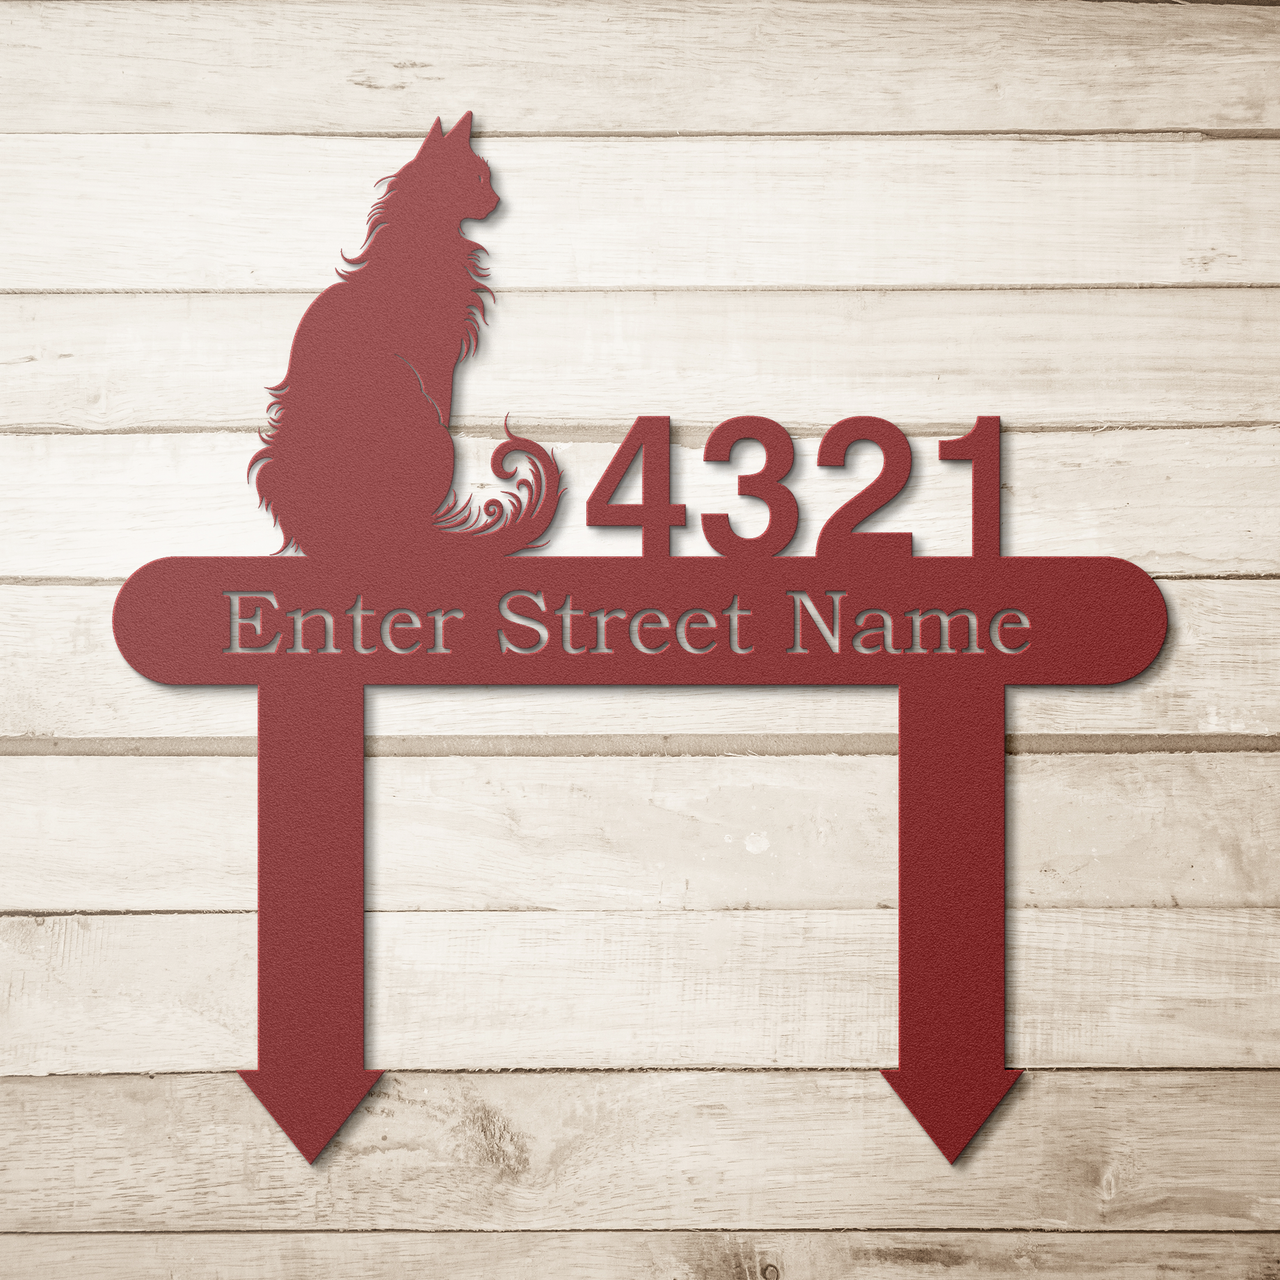 Maine Coon Cat Artistic Personalized Home Address Metal Yard Sign